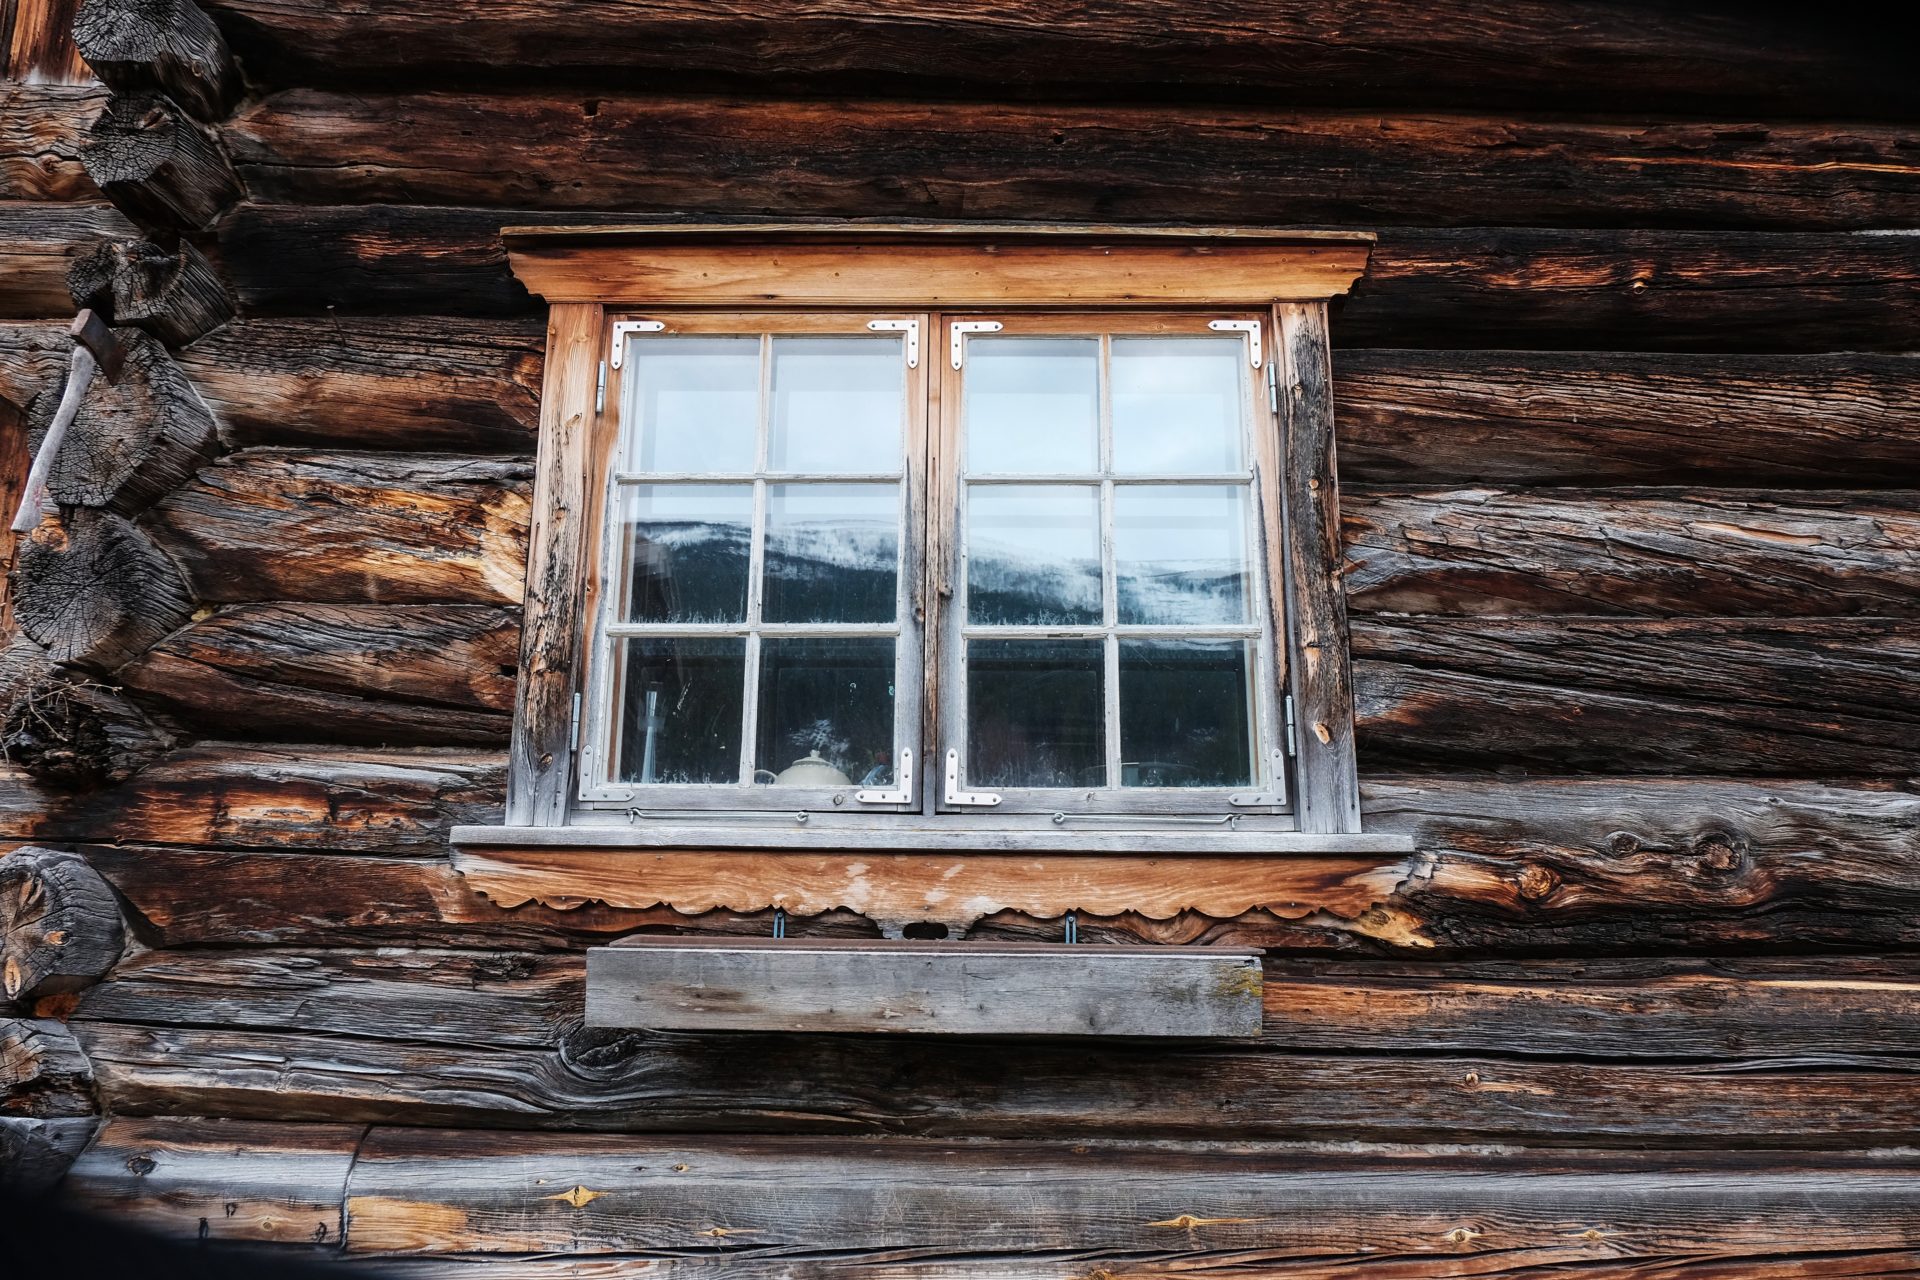 Window on the side of a rustic cabin